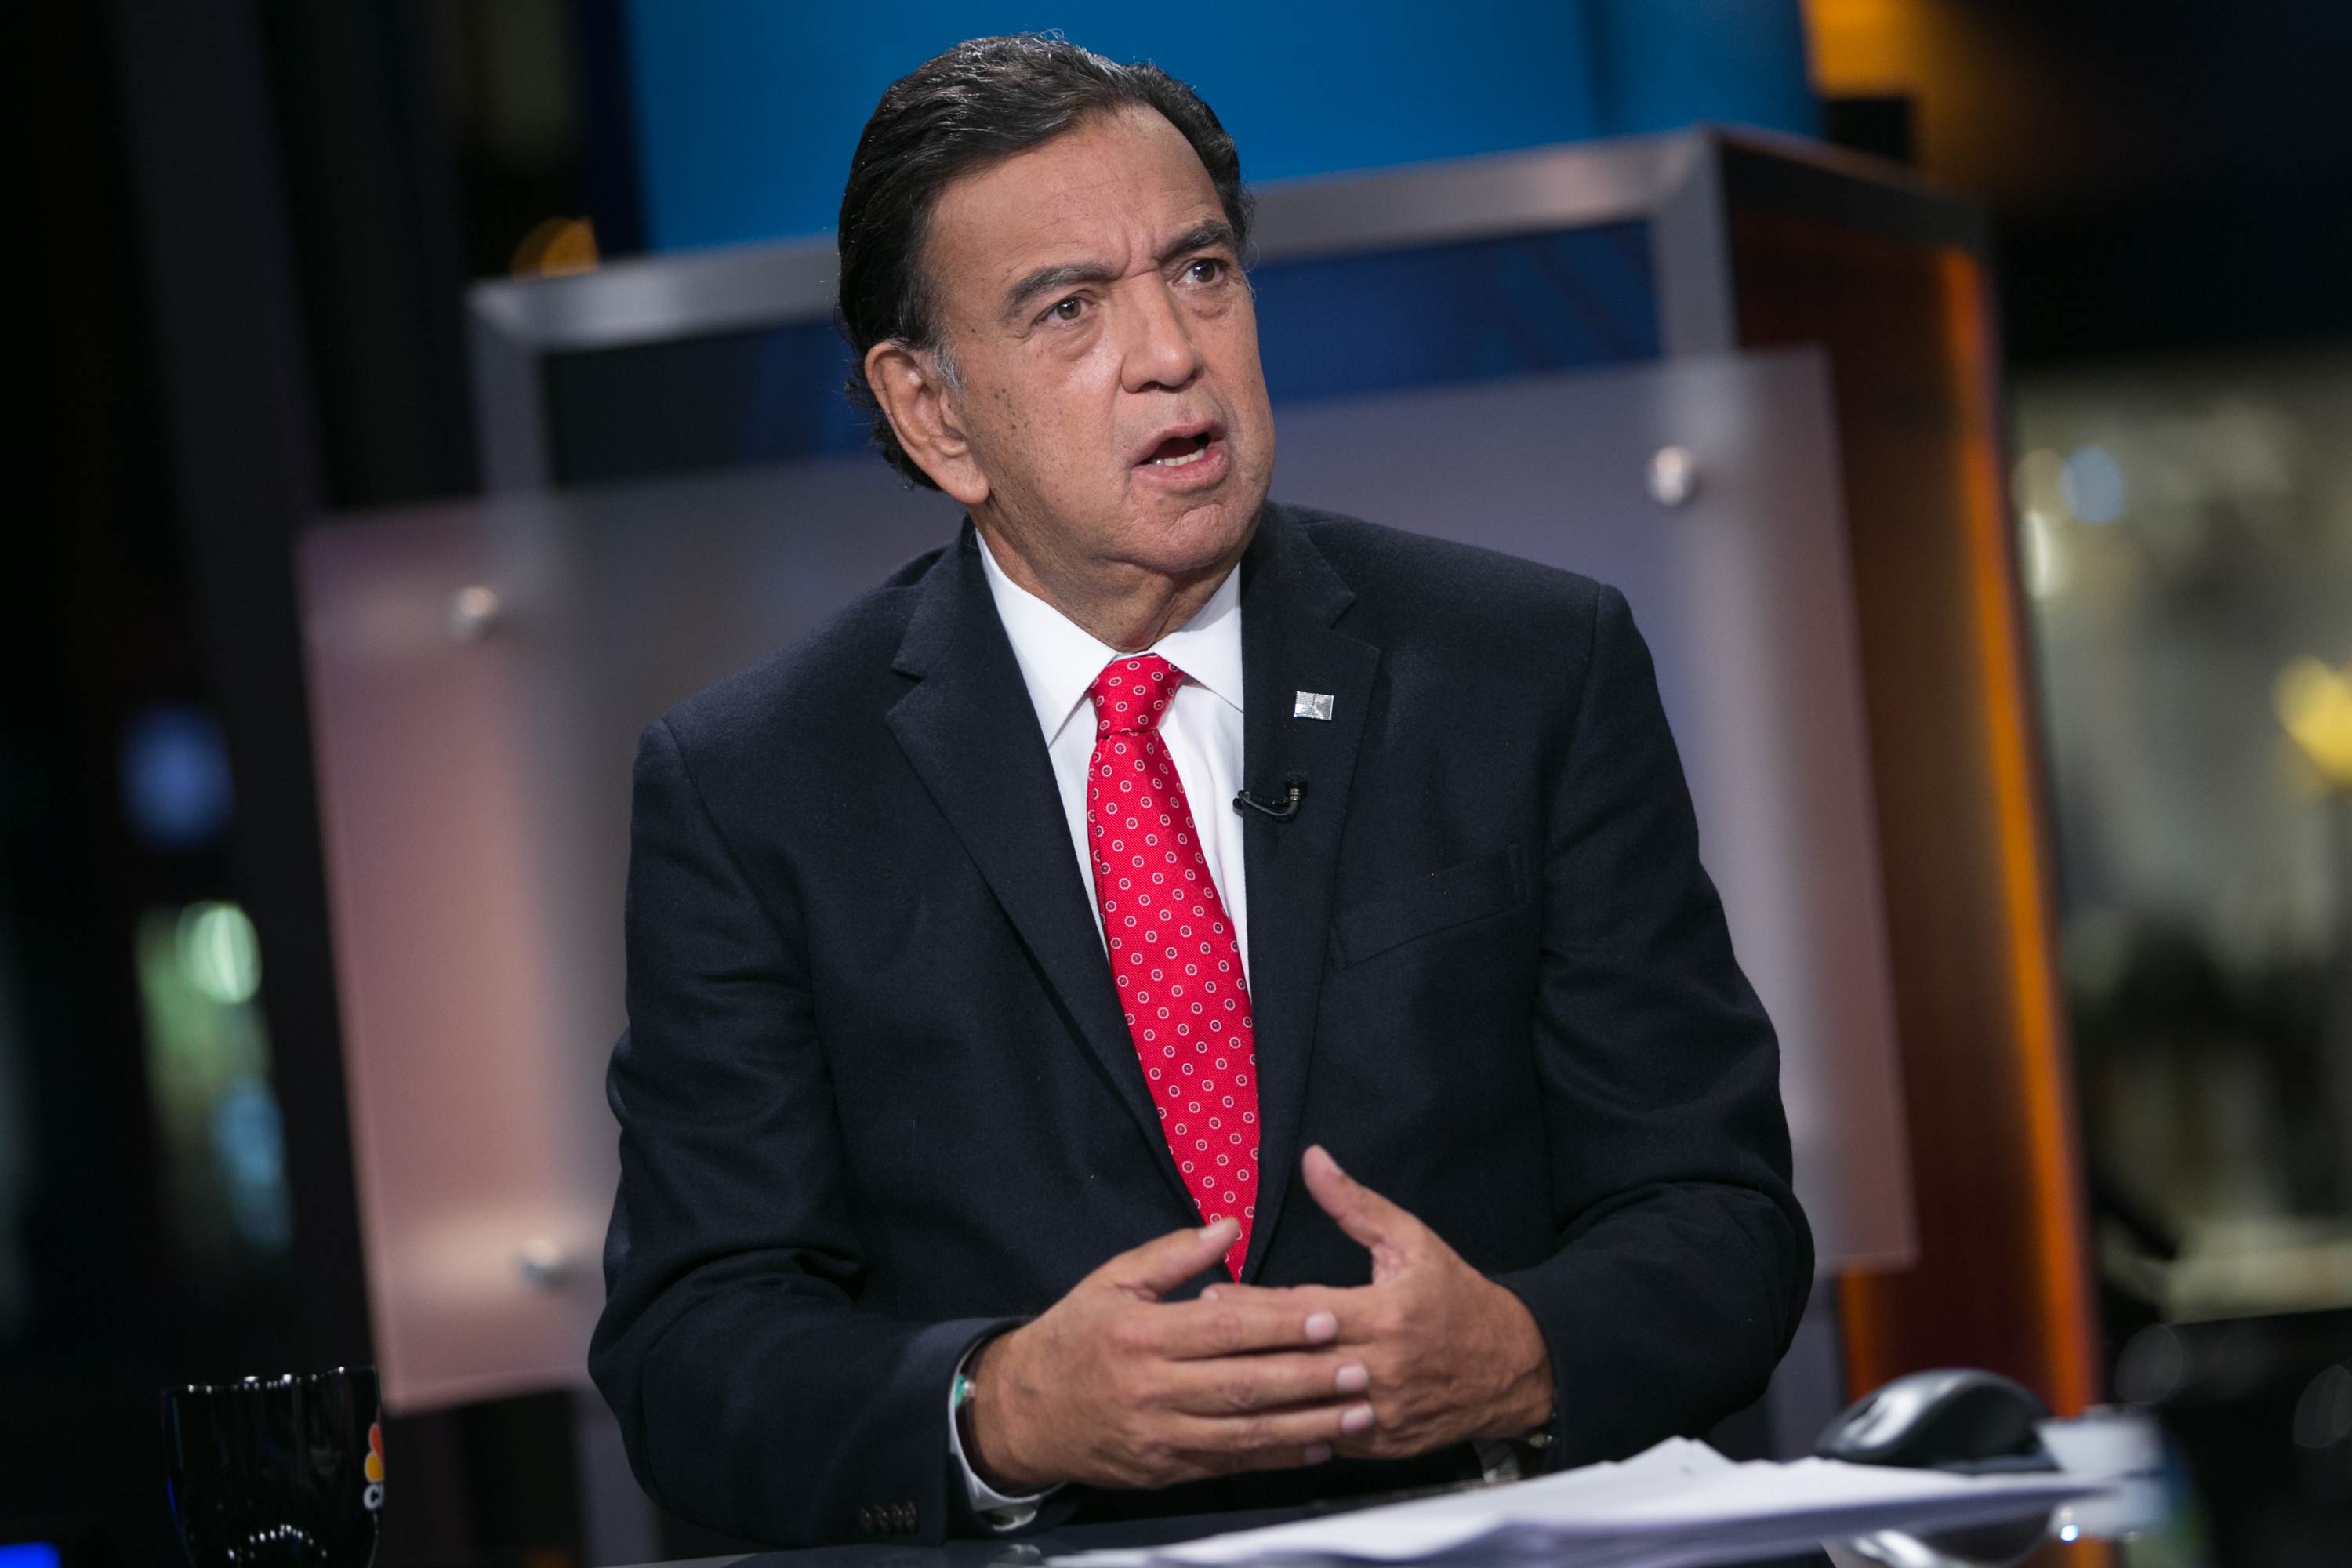 Bill Richardson, former Governor of New Mexico, in an interview on January 13, 2015. (CNBC—NBCU Photo Bank via Getty Images)